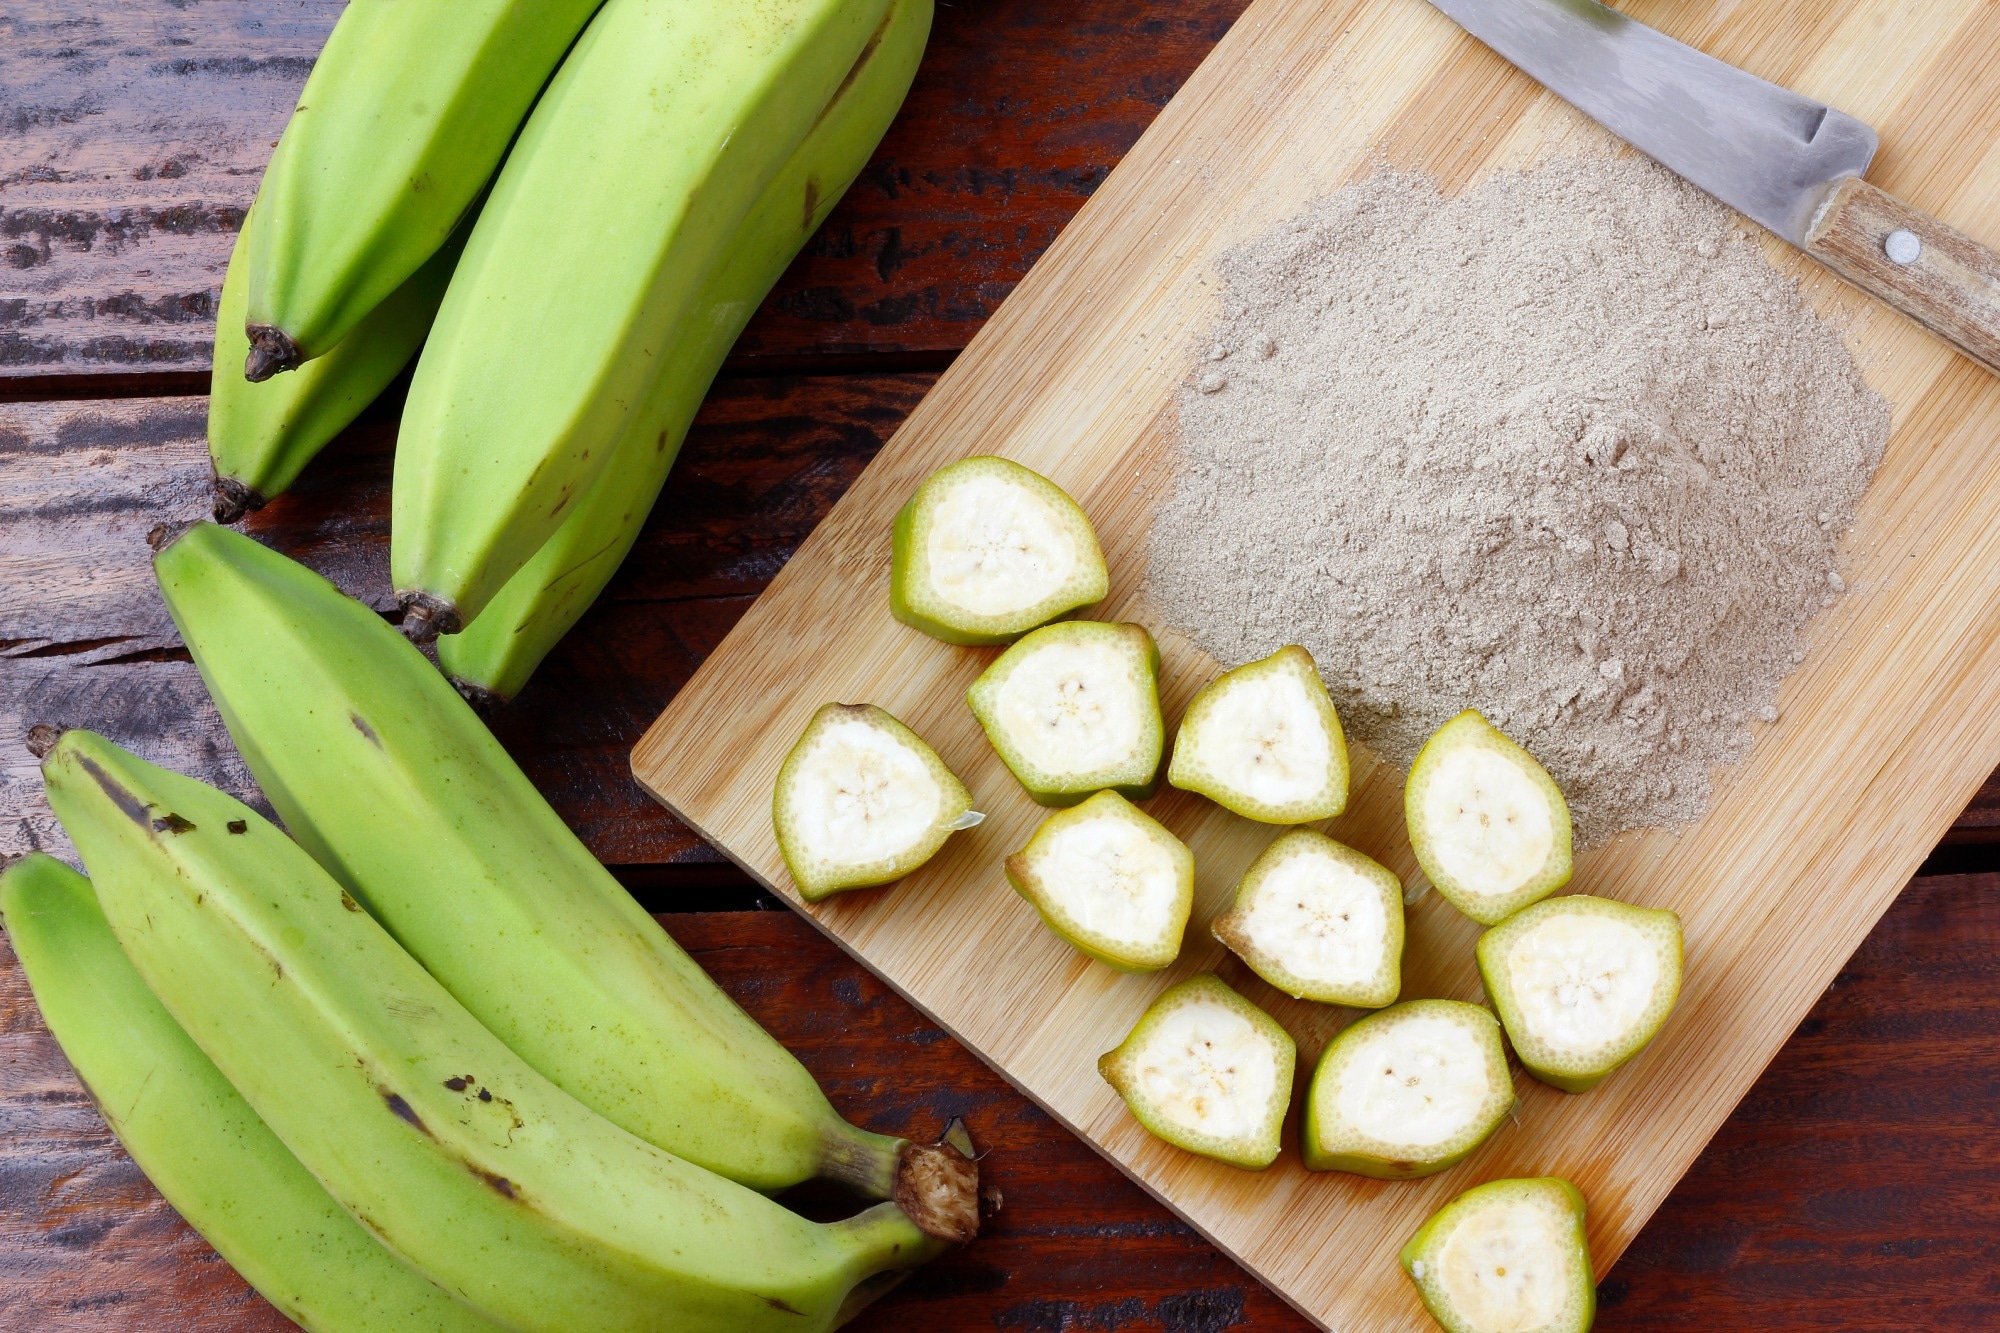 Study: Harnessing the power of resistant starch: a narrative review of its health impact and processing challenges. Image Credit: Adao / Shutterstock